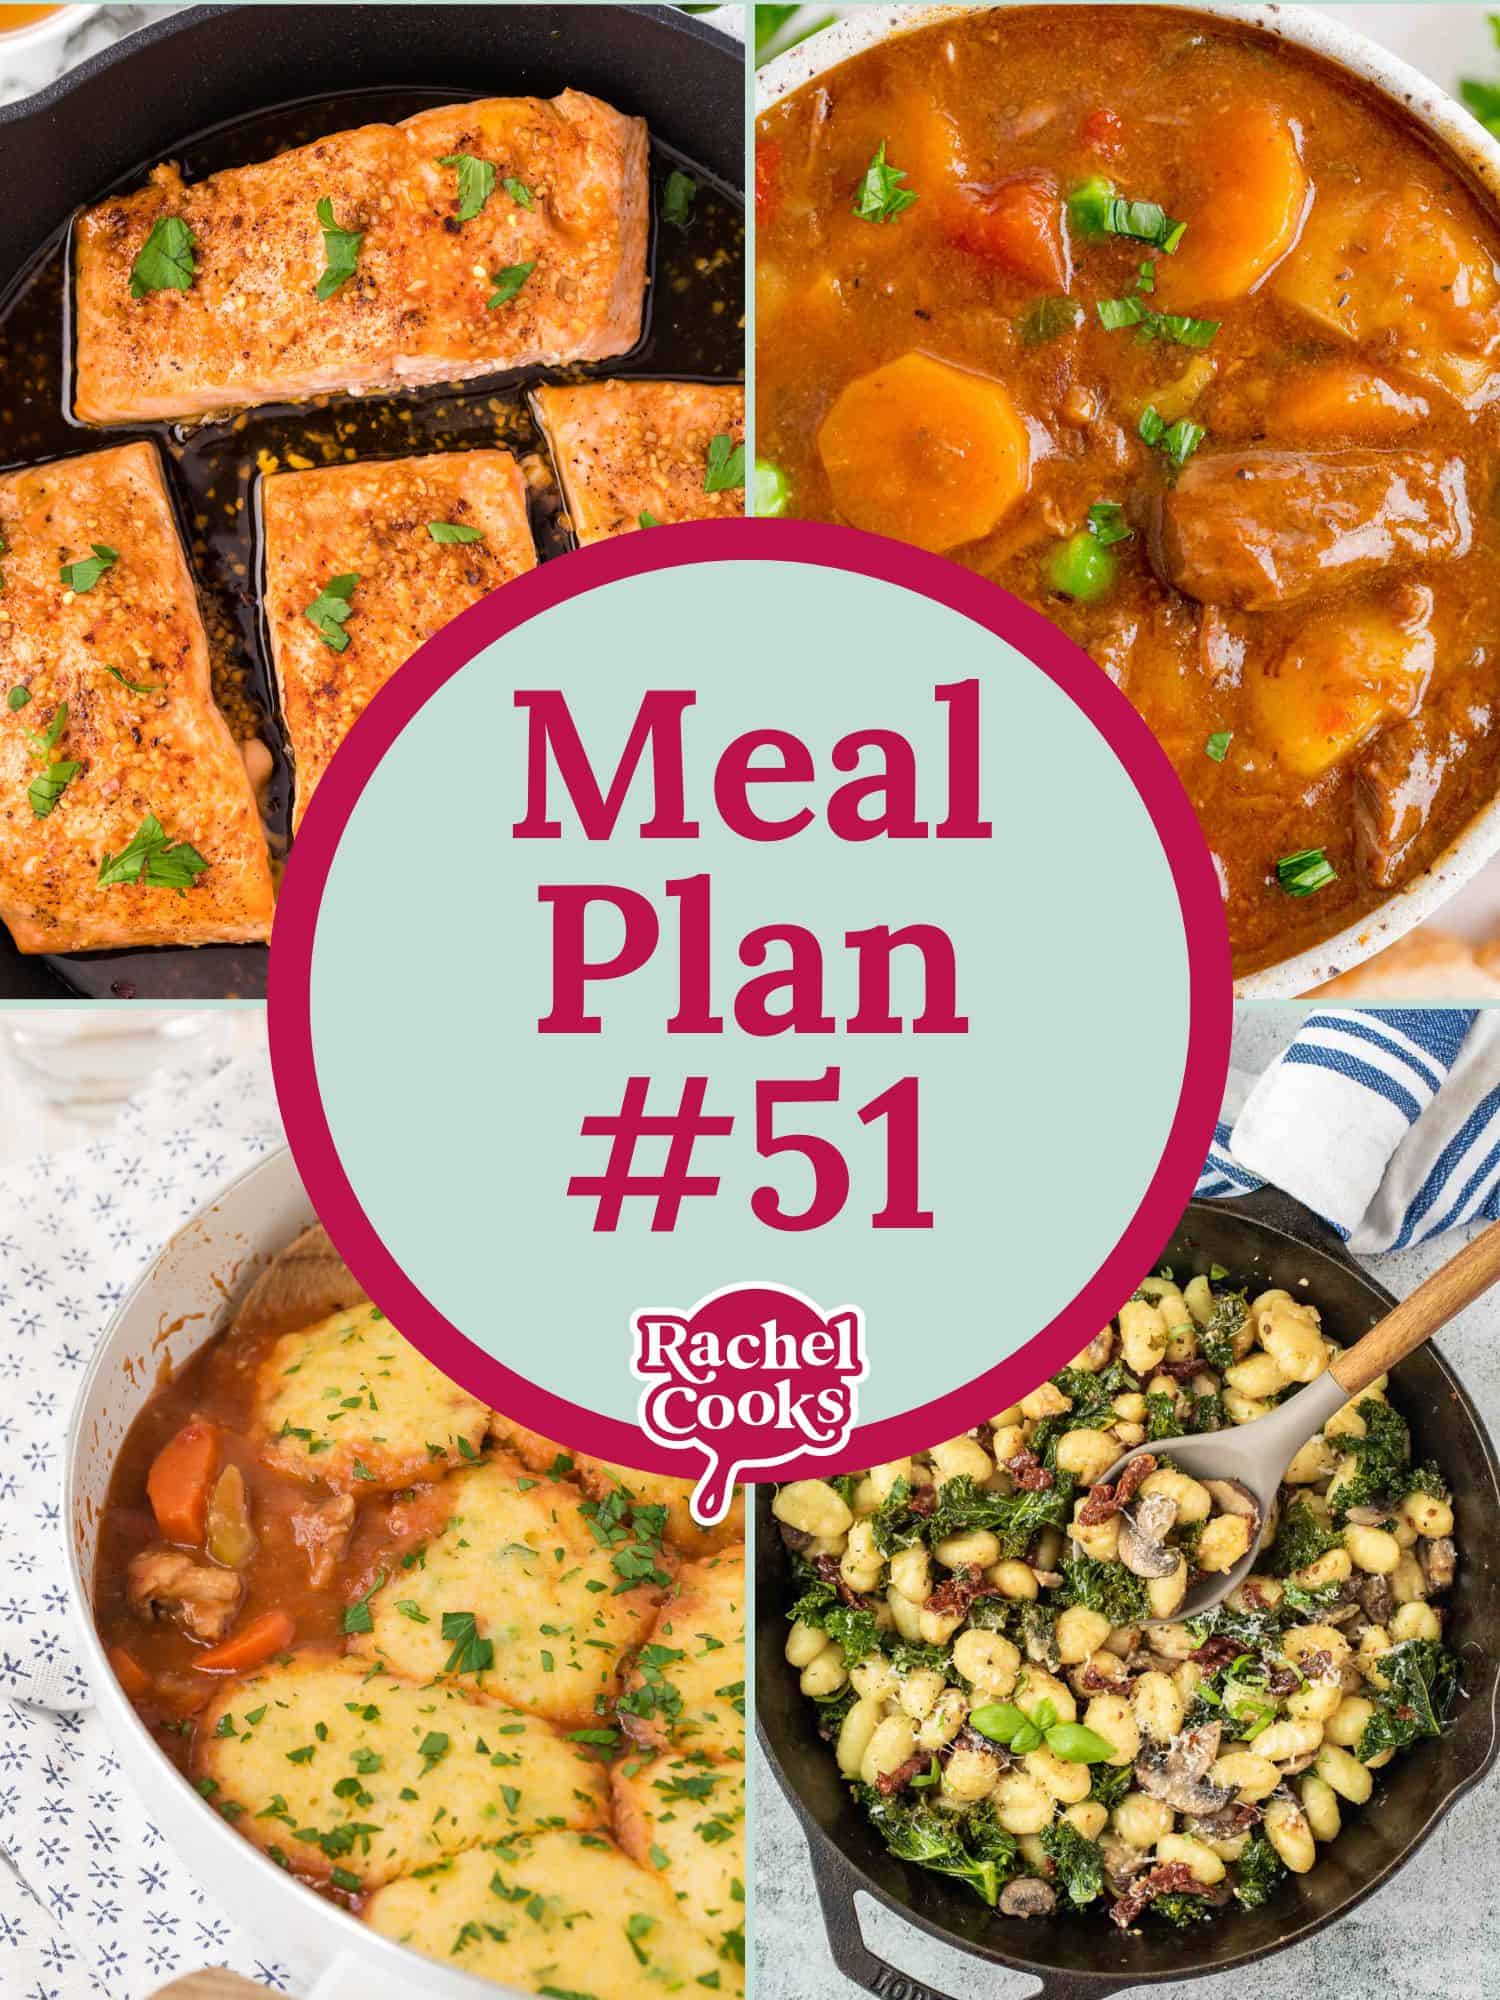 Meal plan 51 preview image with text and photos.